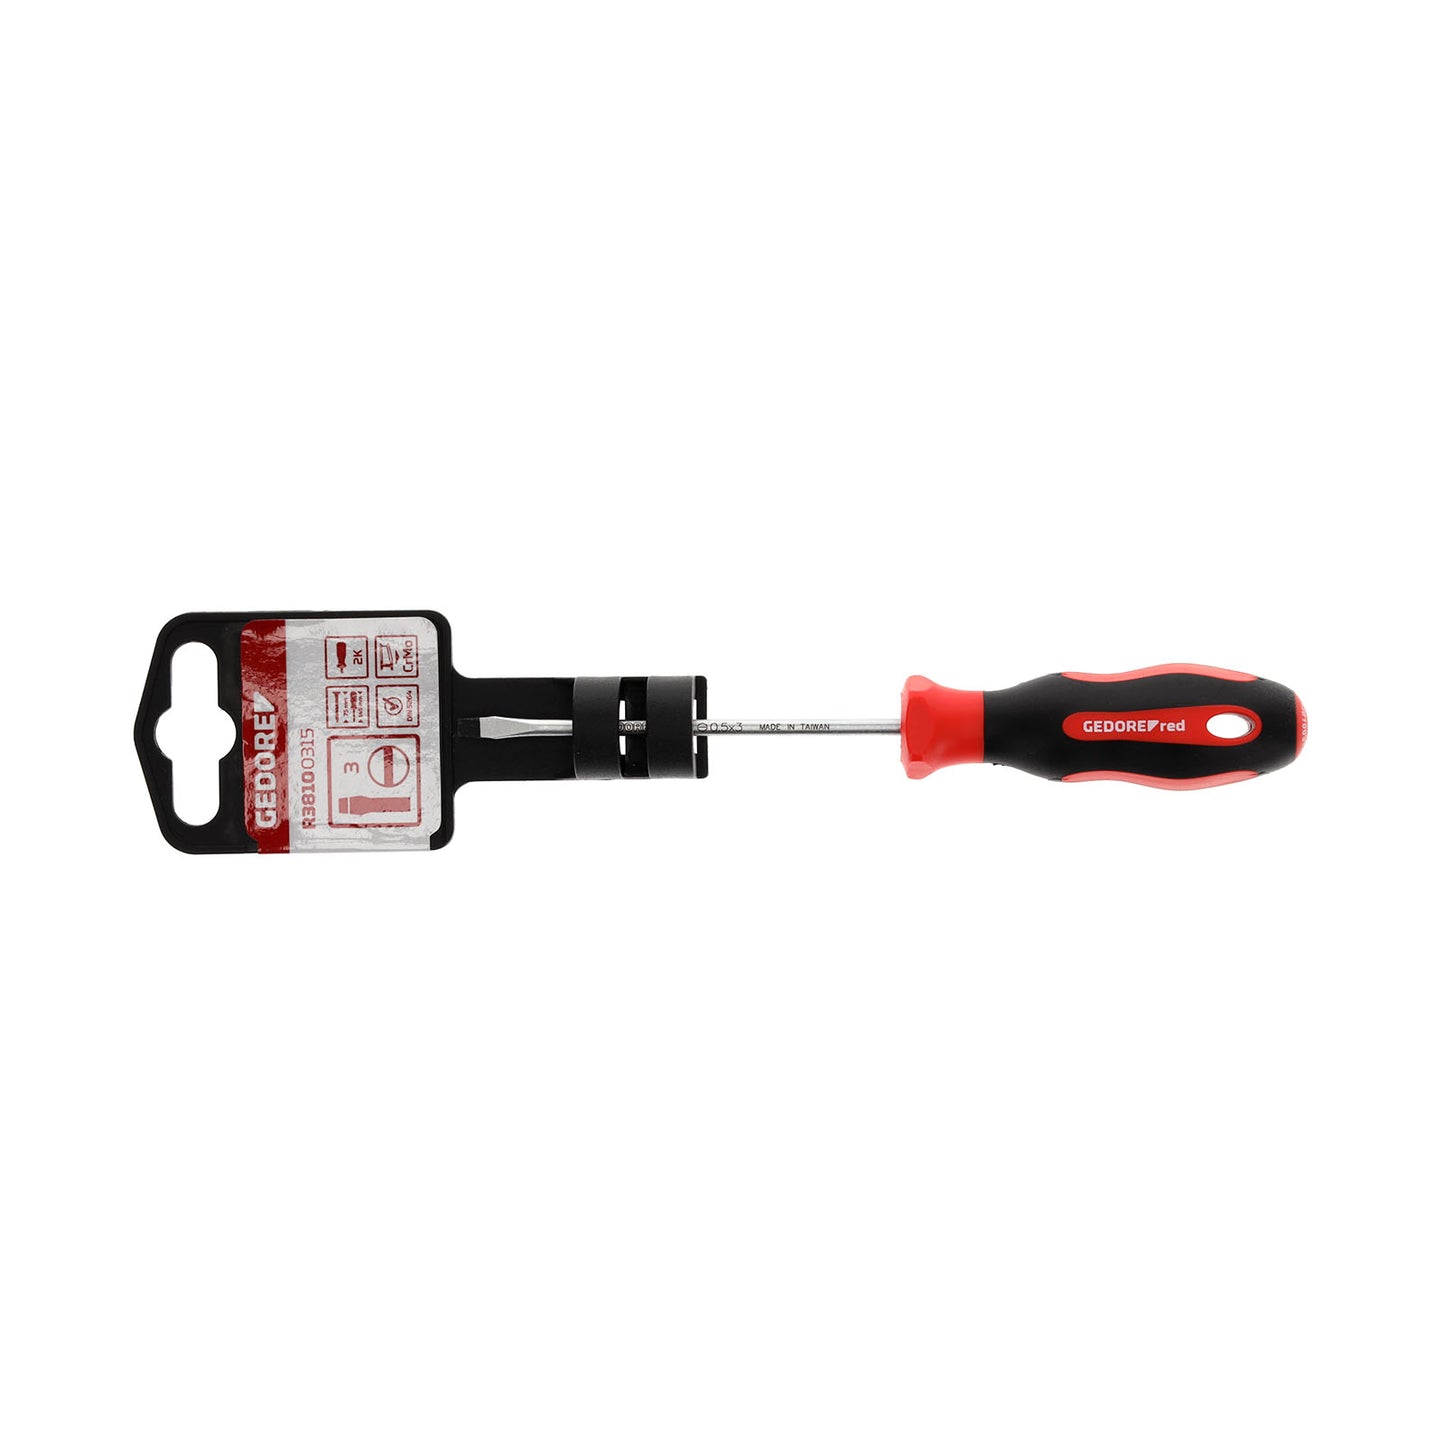 GEDORE red R38100315 - Flat tip screwdriver, 3 mm (3301225)